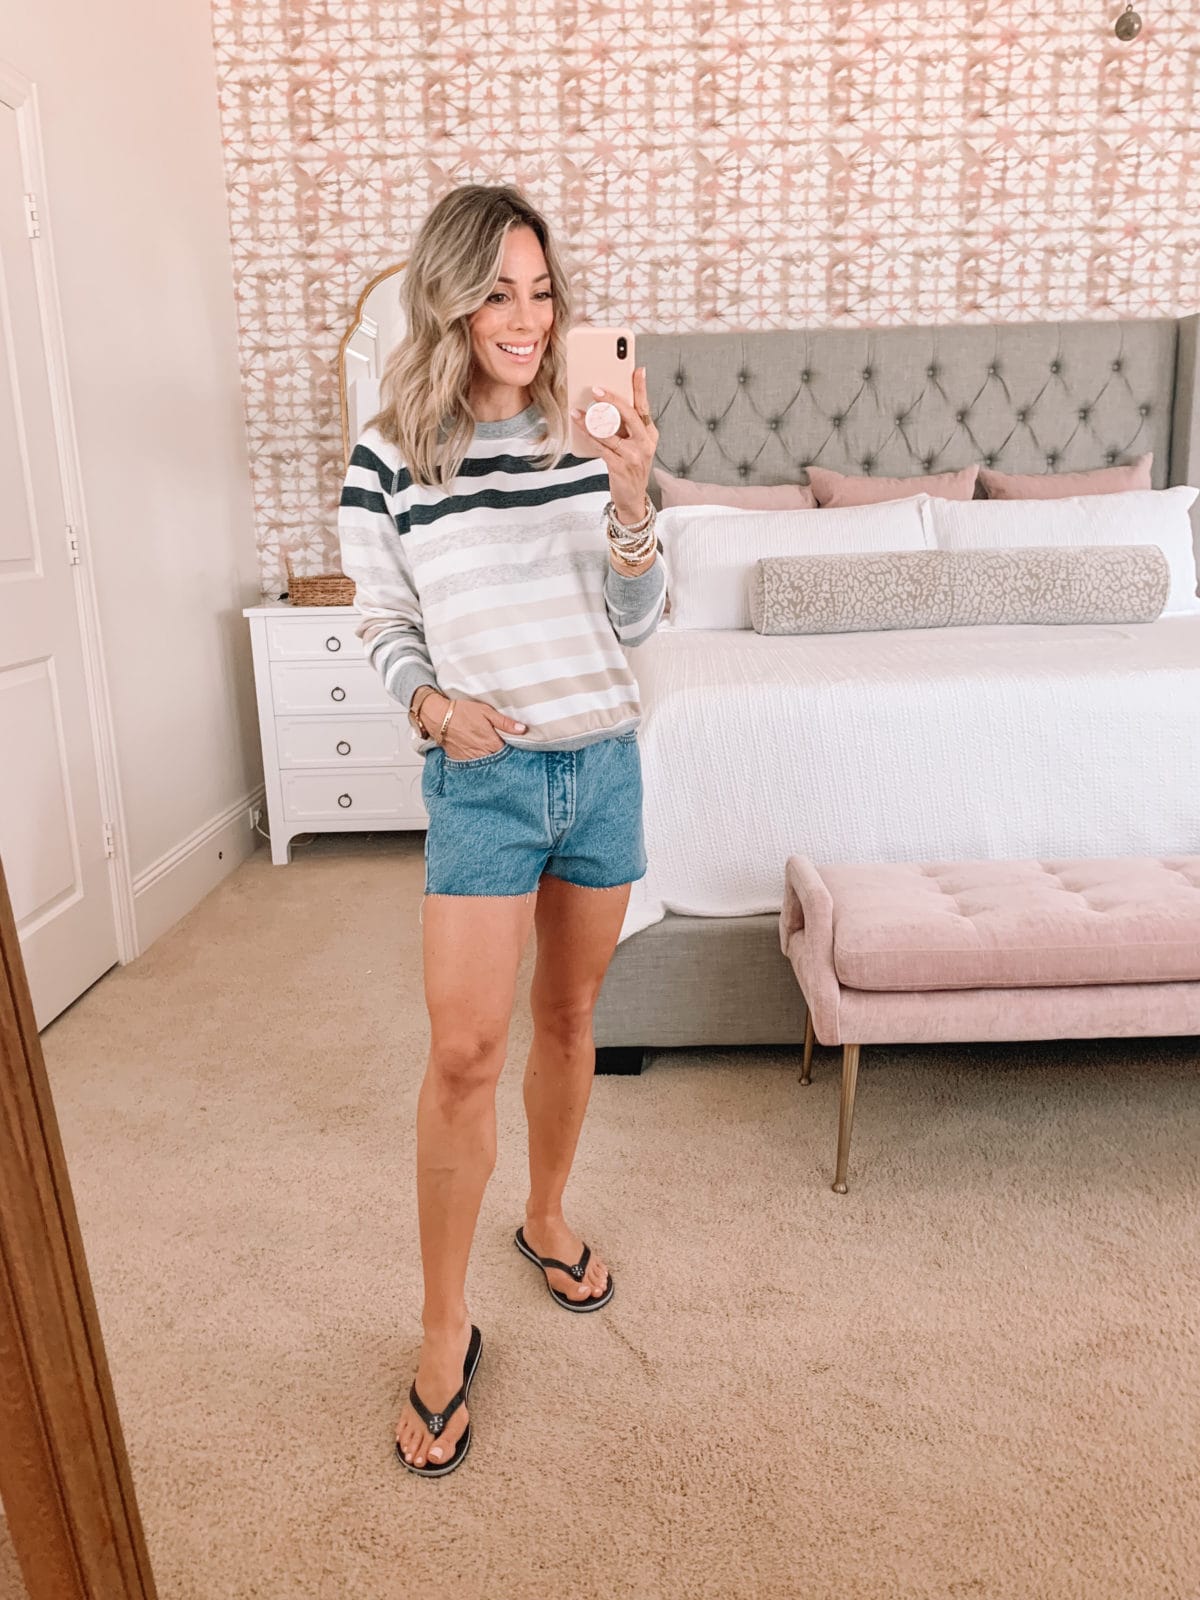 Dressing Room Finds, Stripe Sweatshirt and Shorts with Flip Flops 